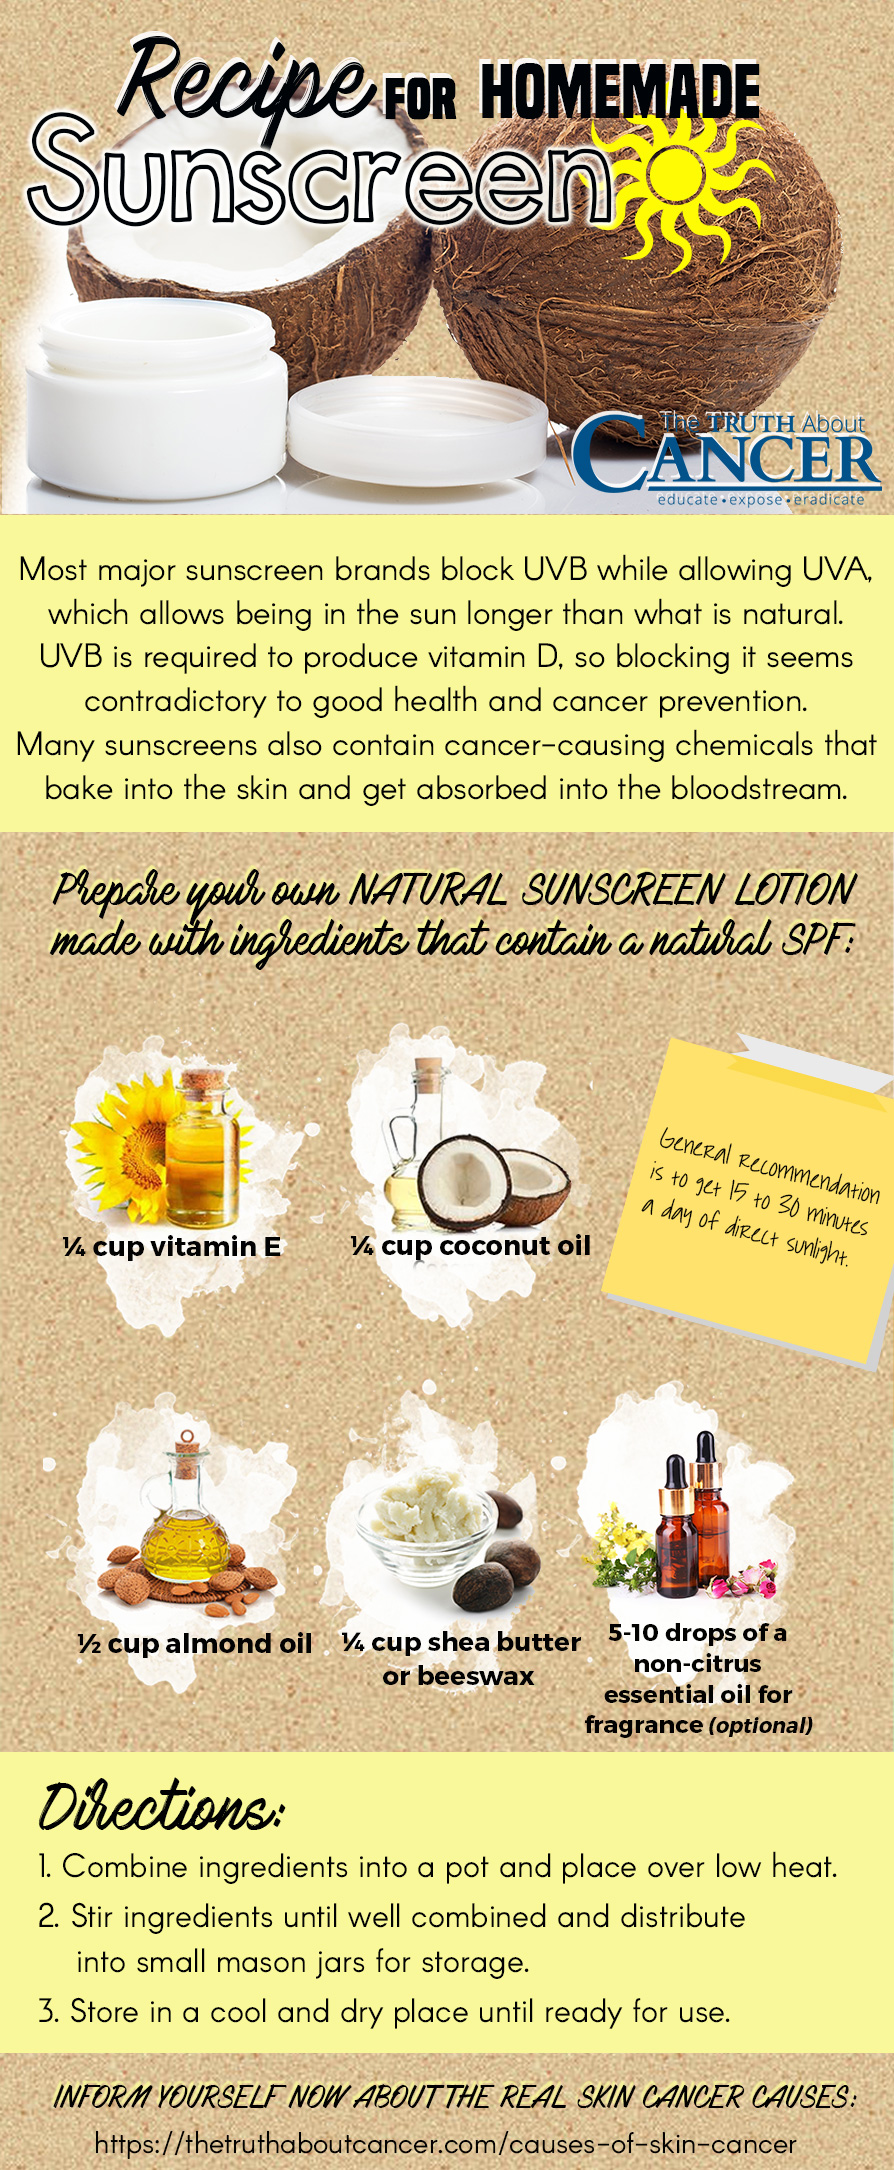 Here's a natural sunscreen recipe you can make at home . Your skin will thank you!